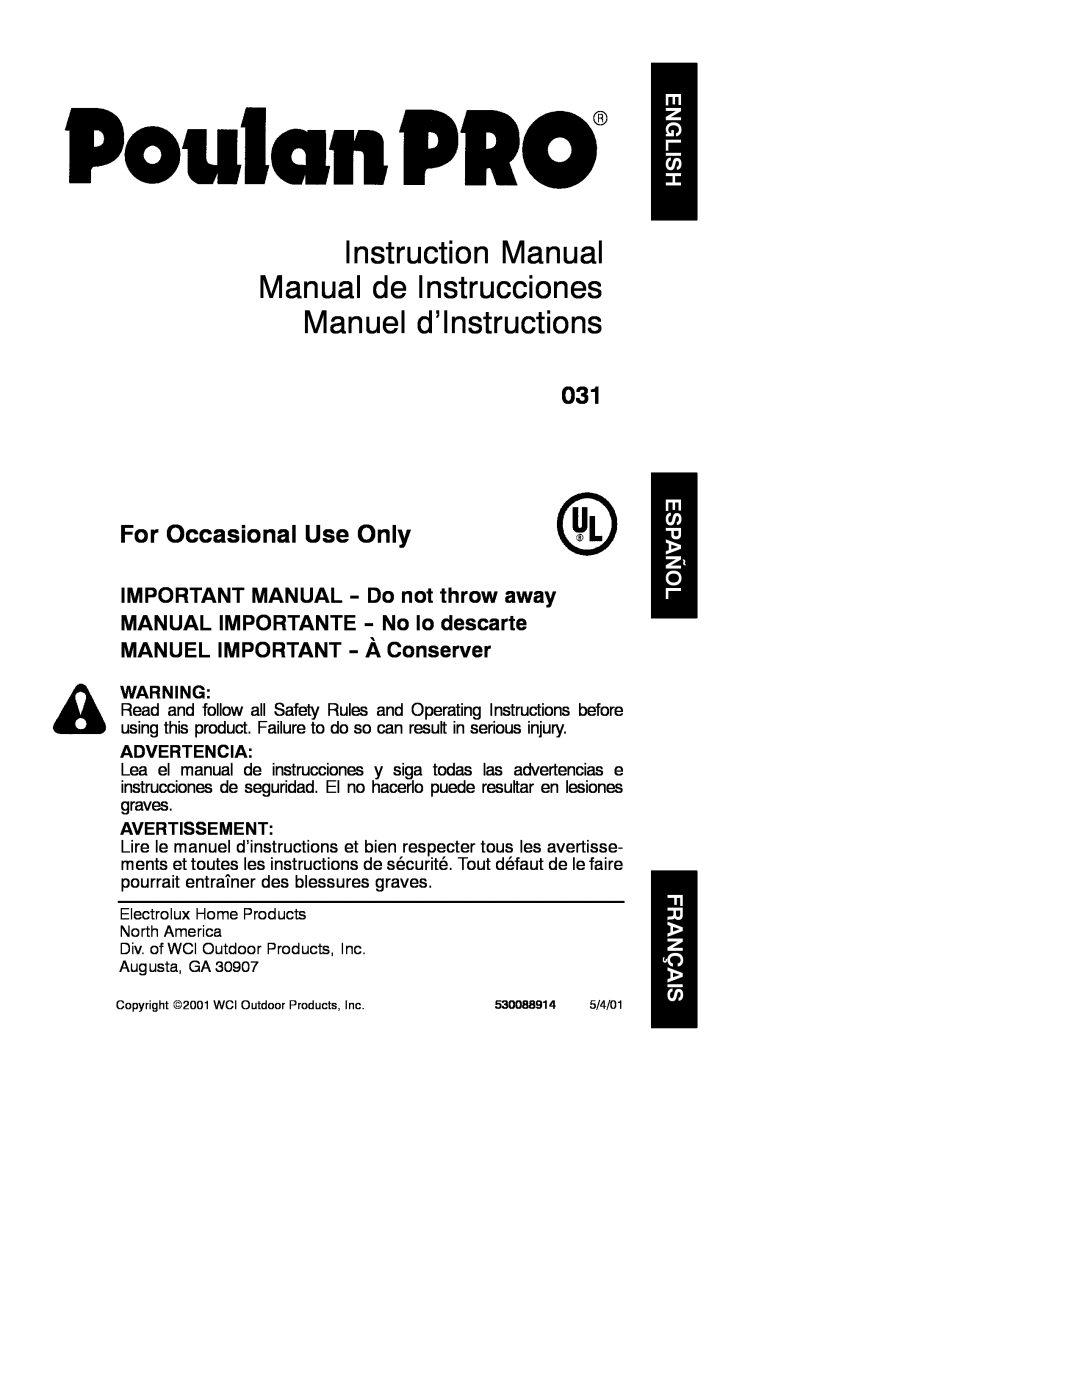 Poulan 31 instruction manual For Occasional Use Only, Advertencia, Avertissement 